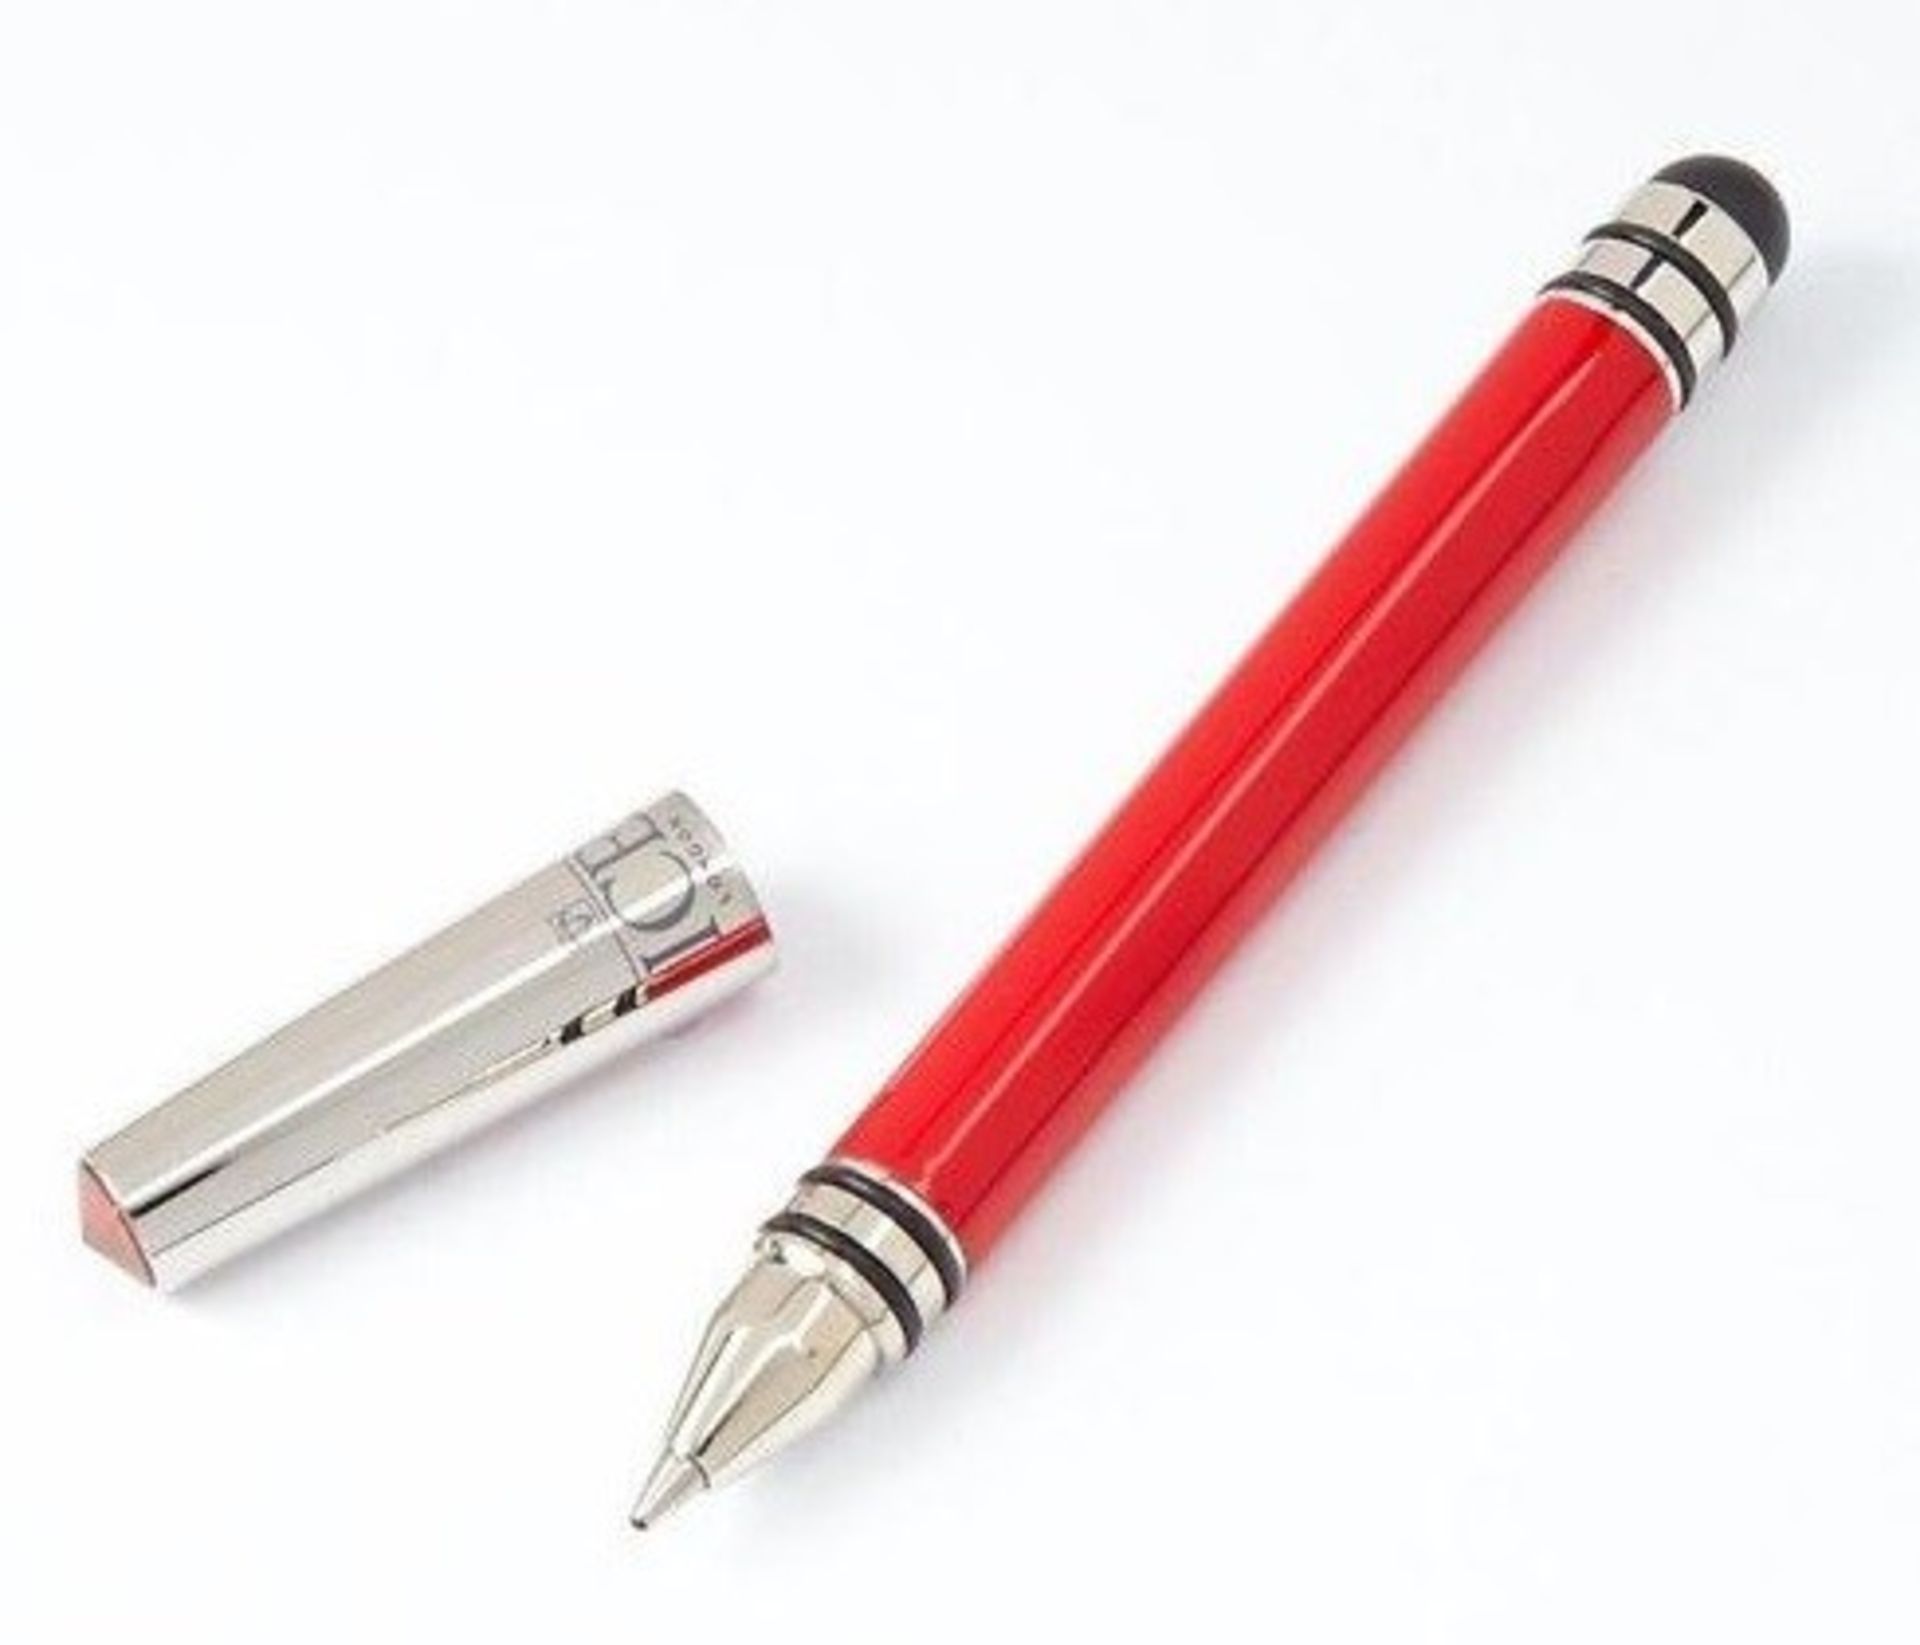 50 x ICE LONDON App Pen Duo - Touch Stylus And Ink Pen Combined - Colour: RED - MADE WITH